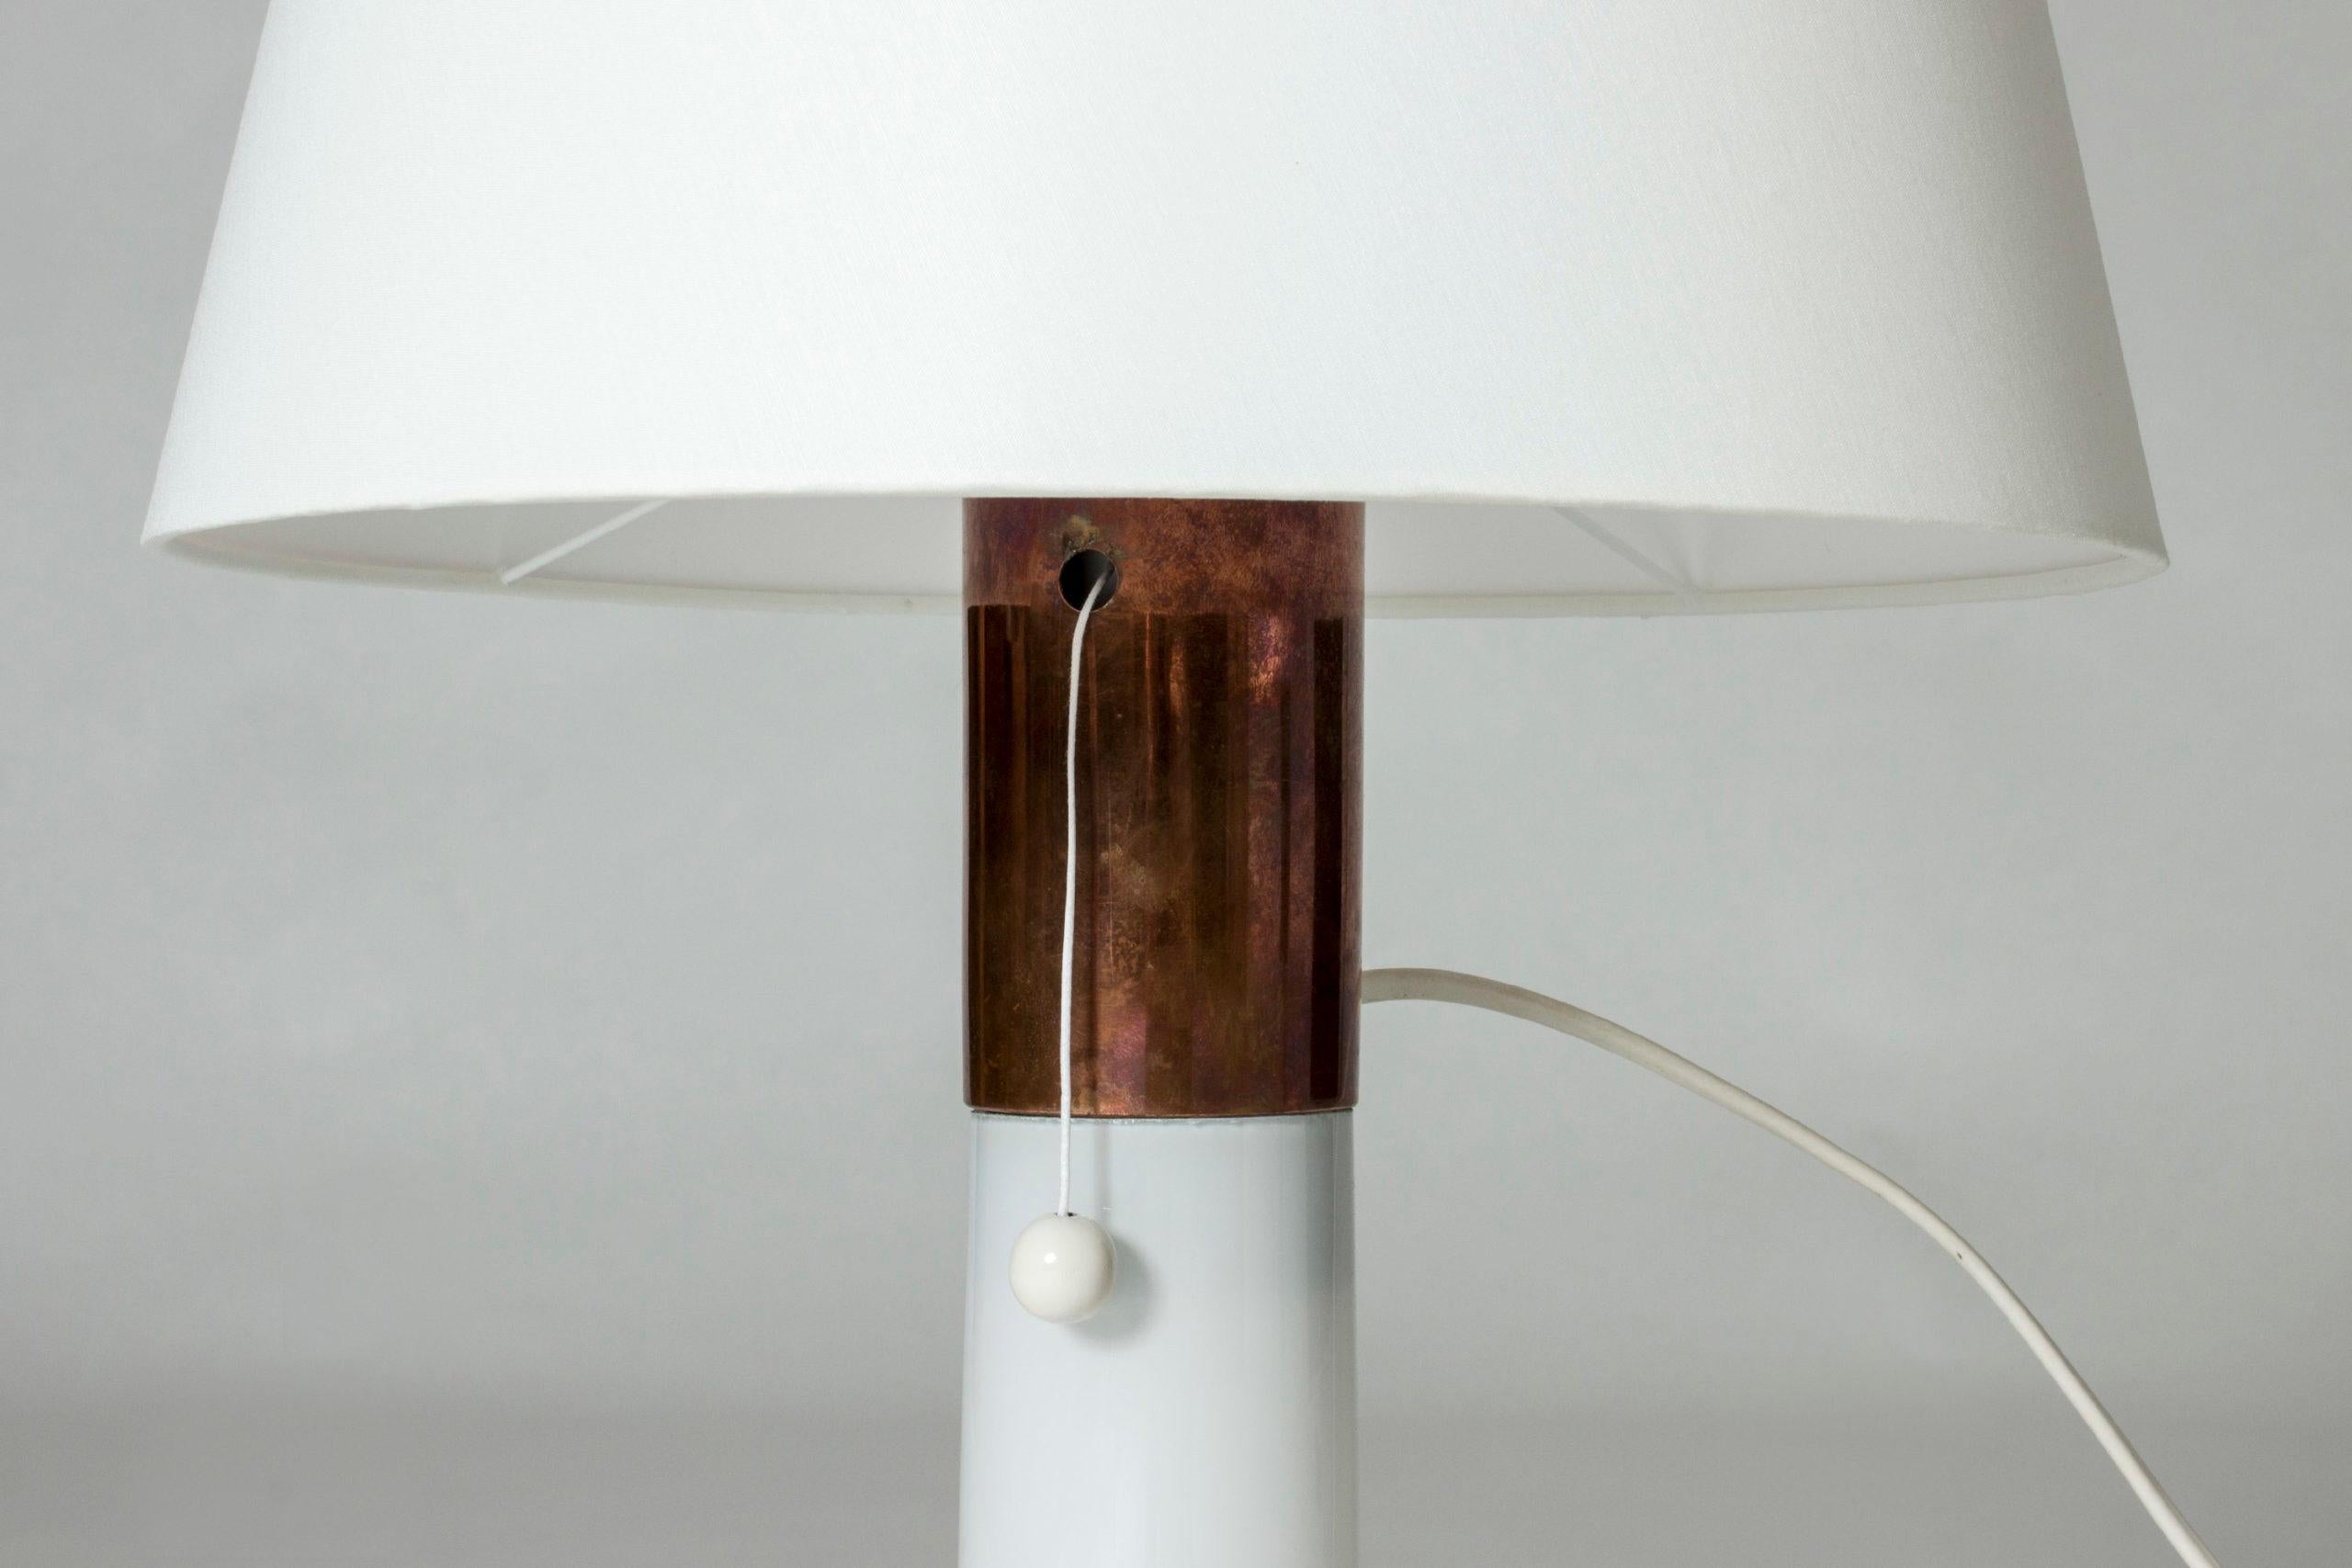 Opaline Glass Pair of Glass Table Lamps by Lisa Johansson-Pape for Orno, Sweden, 1950s